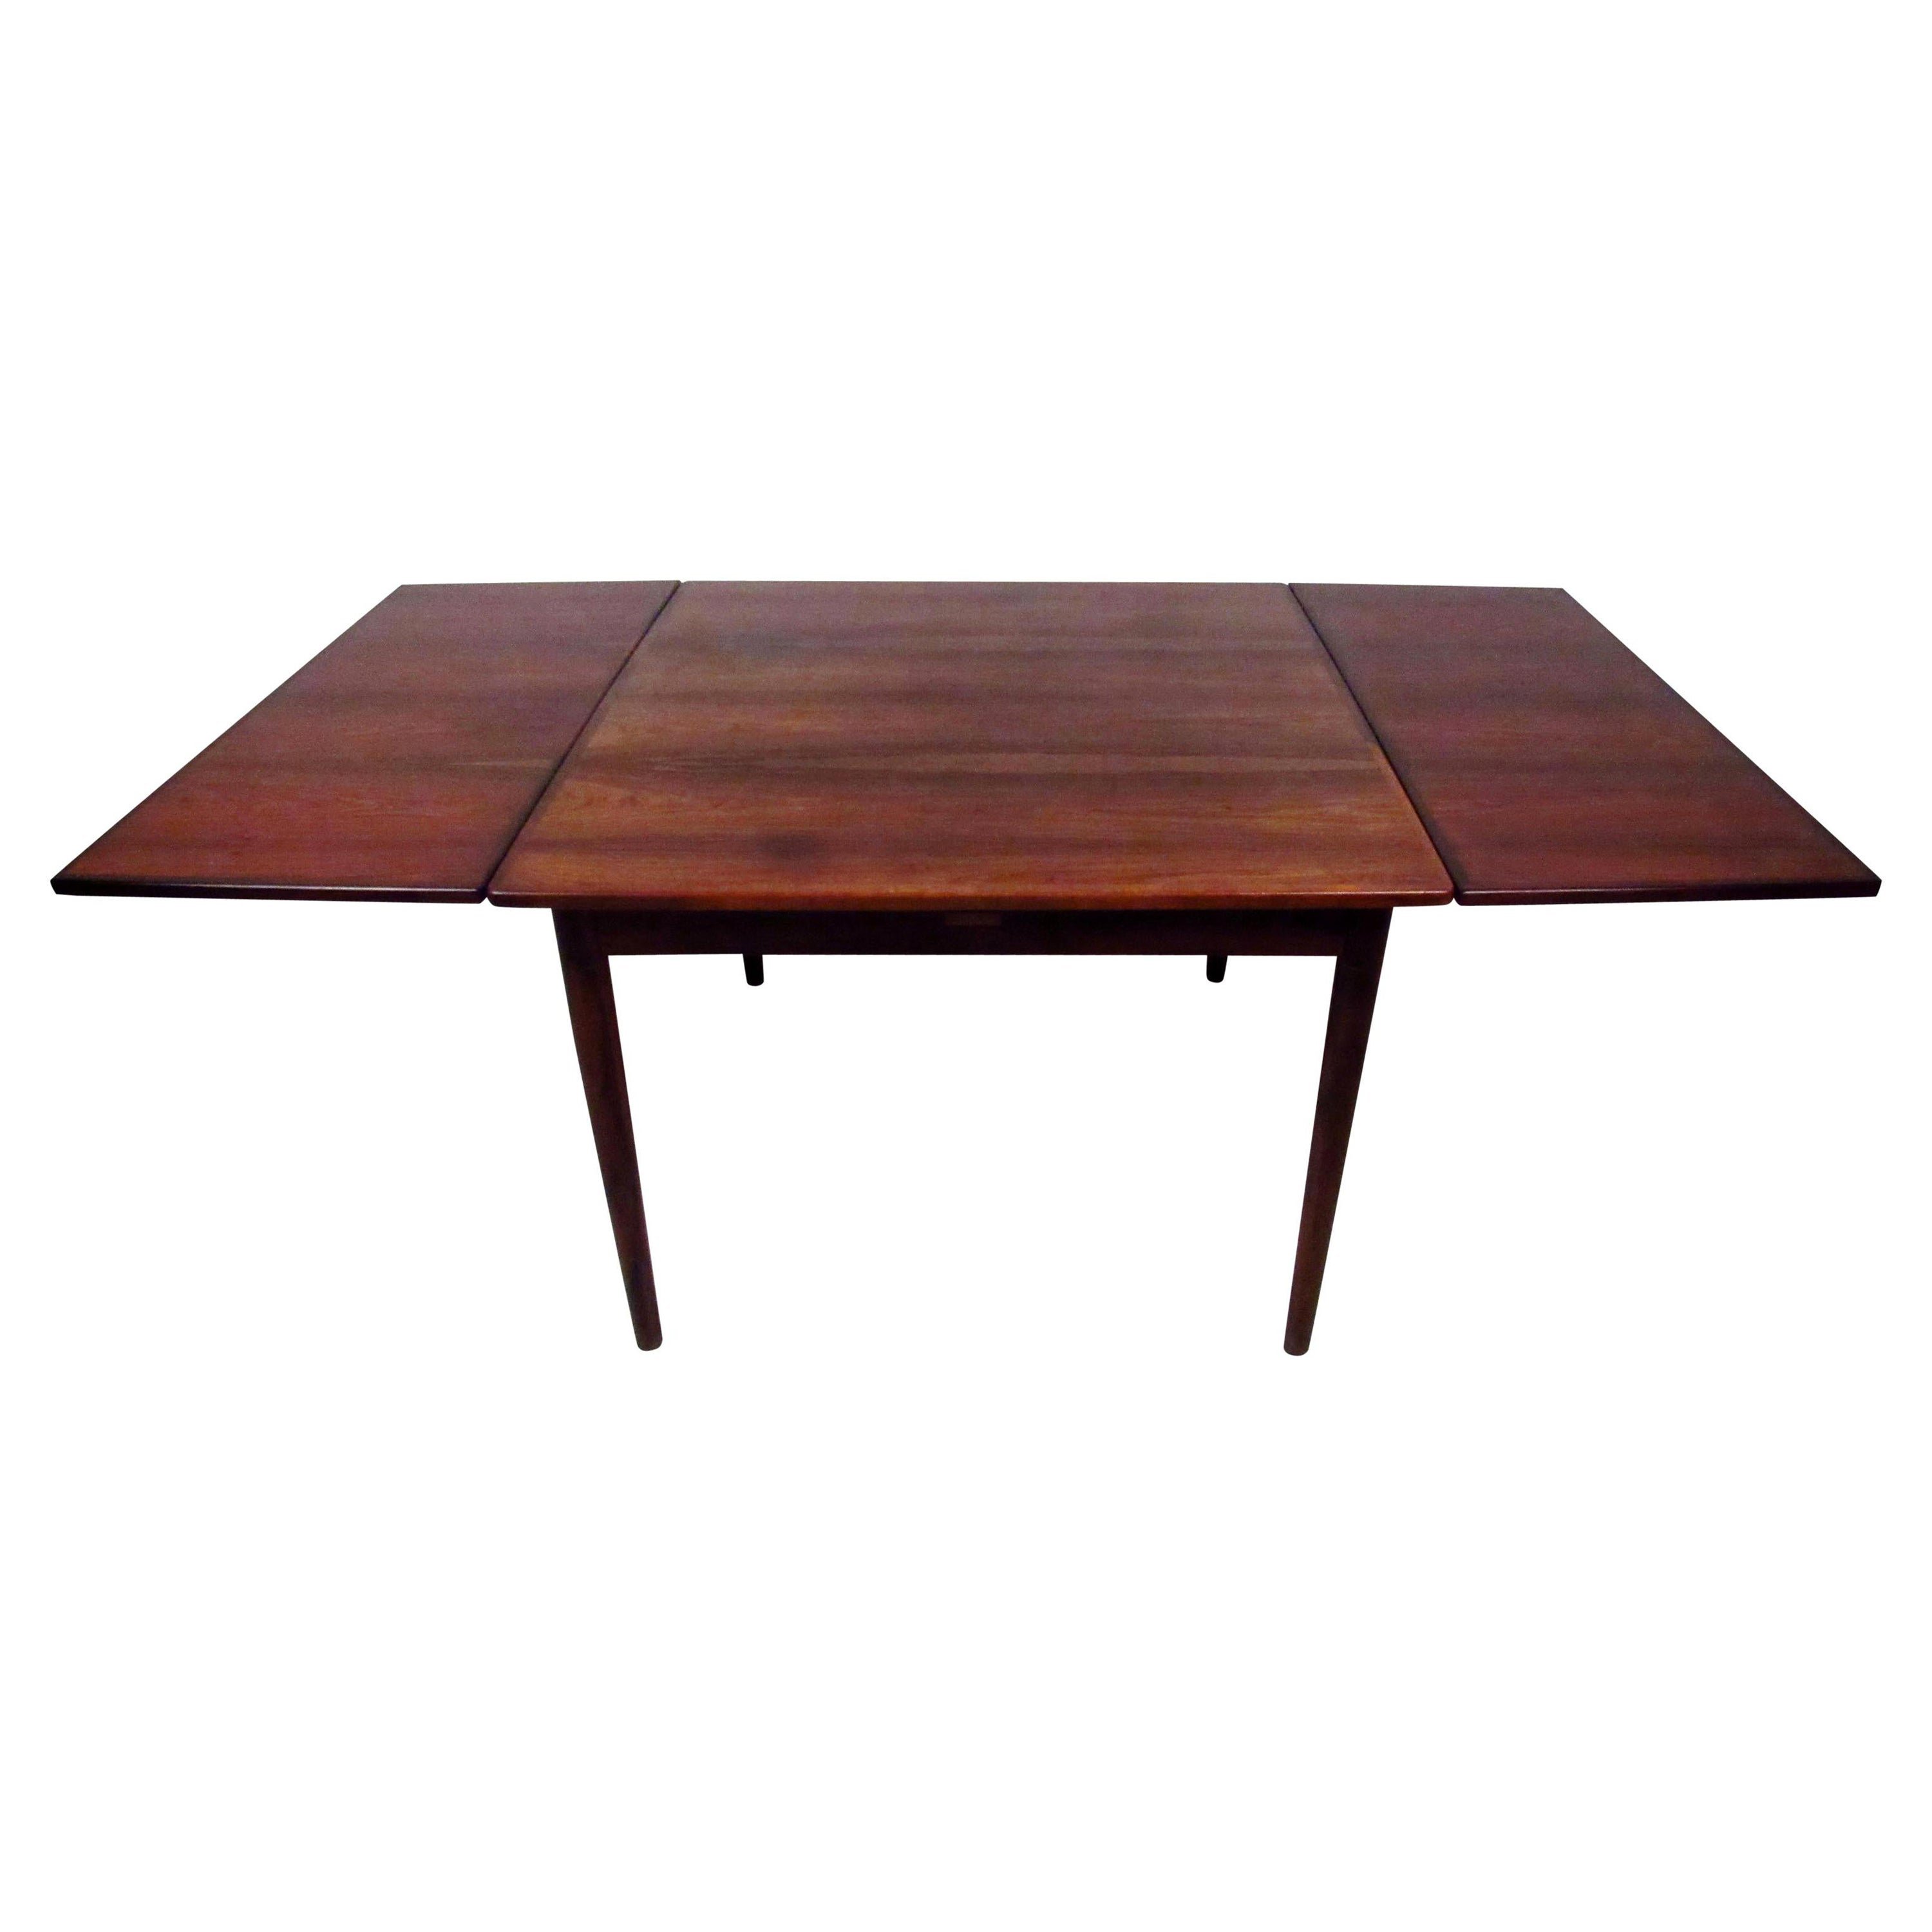 Danish Rosewood Dining Table Attributed to Arne Vodder